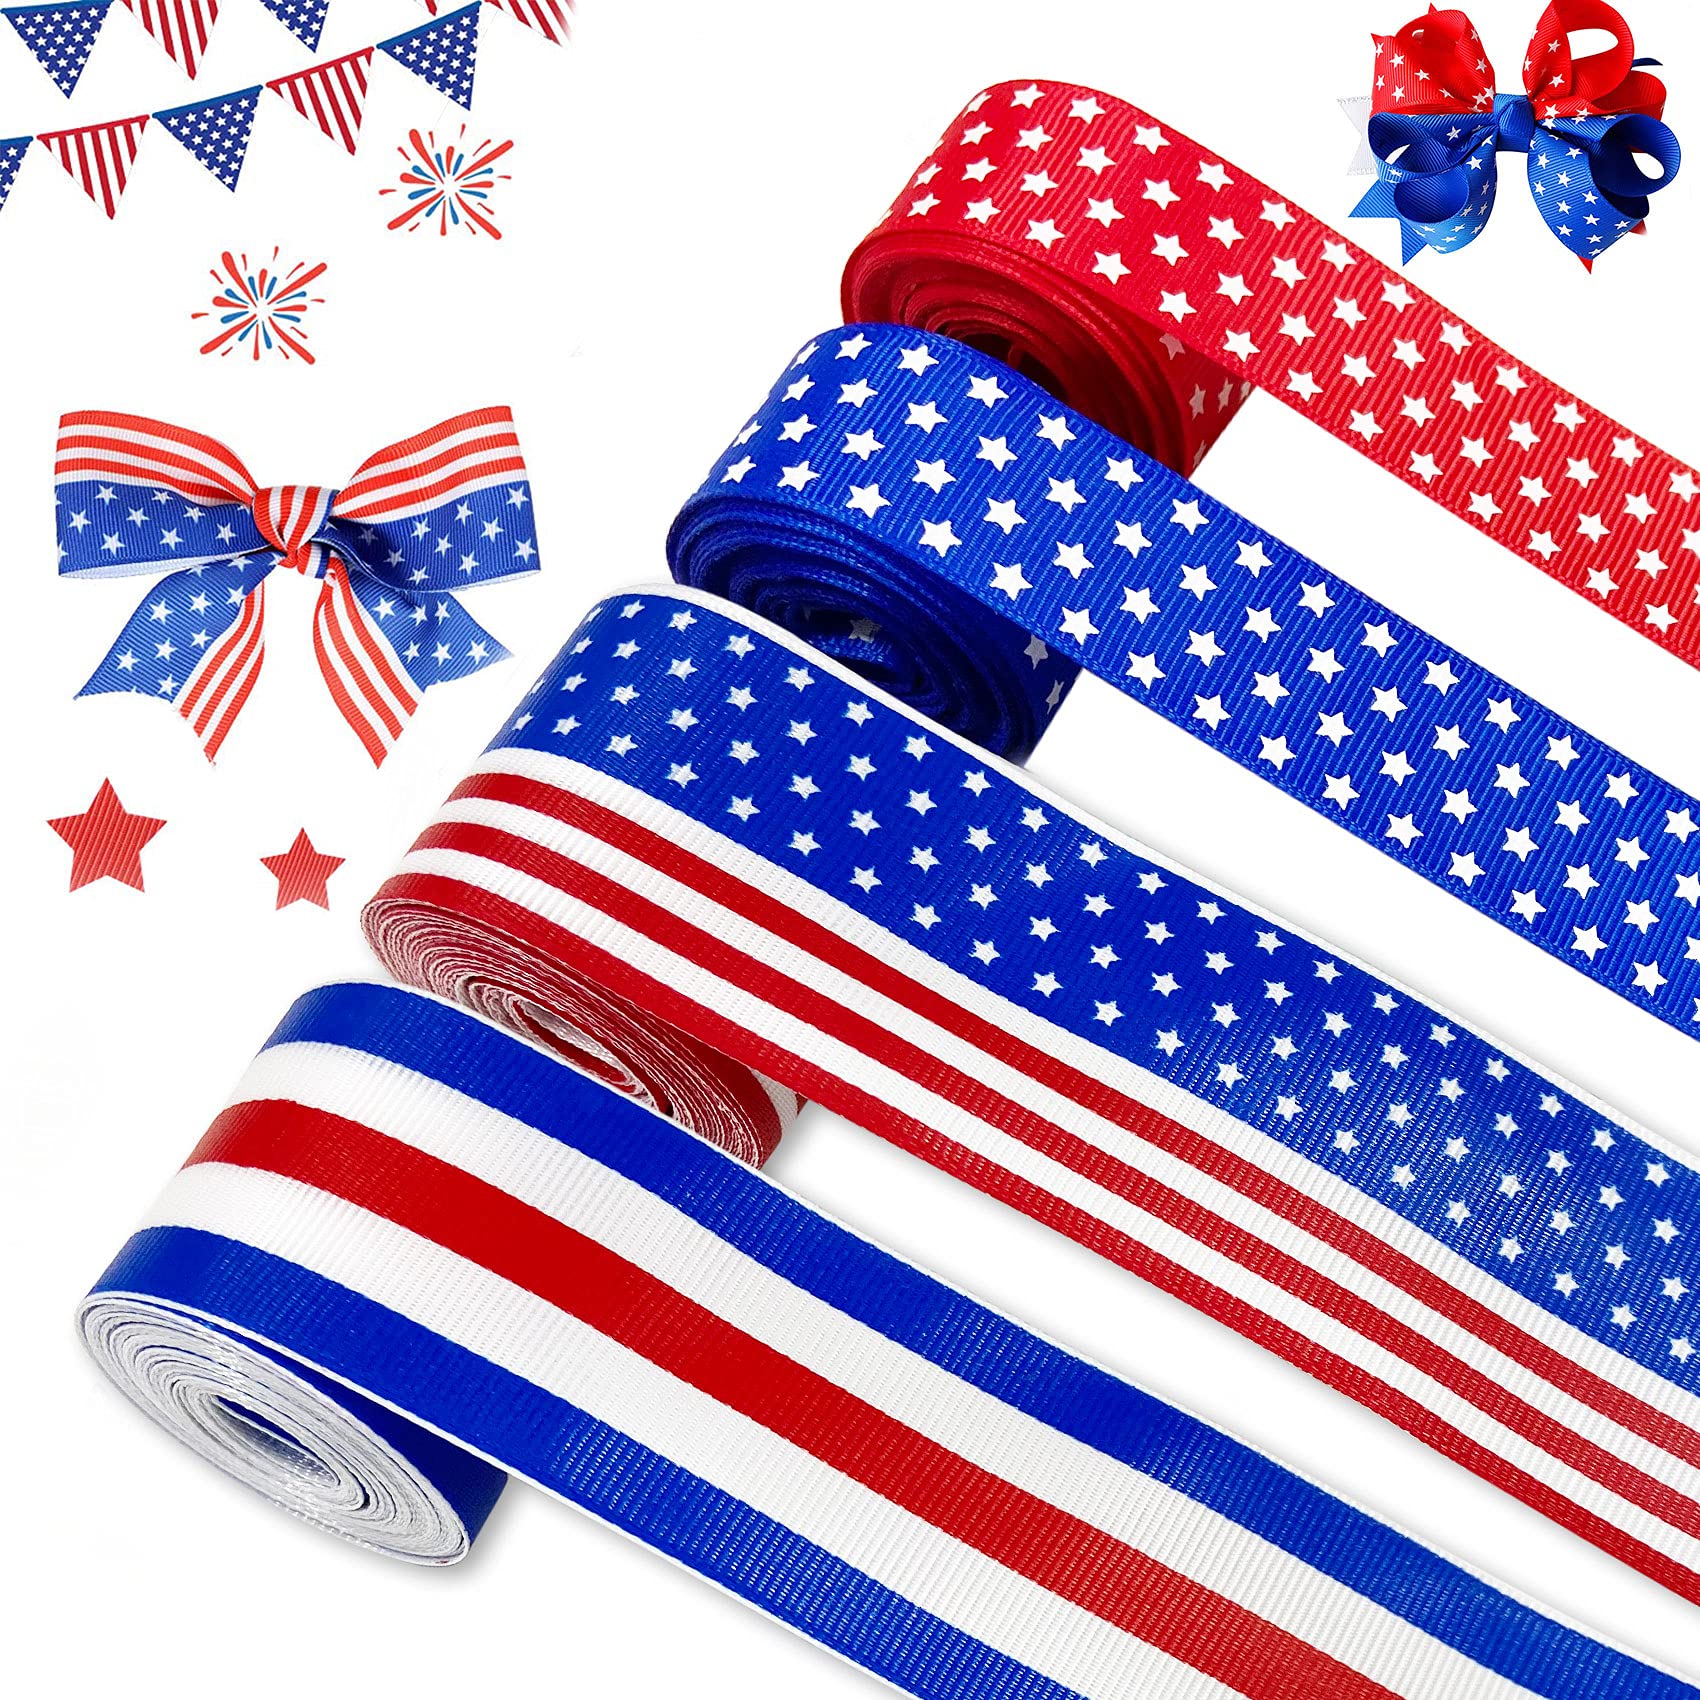 Joy Bang 4th of July Ribbon 4 Rolls, Patriotic Ribbon, Independence Day Stars Strips Ribbons, 20 Yard Fourth of July Wreaths Hair Ribbon Decorations, Memorial Veterans Day Decor Red White Blue